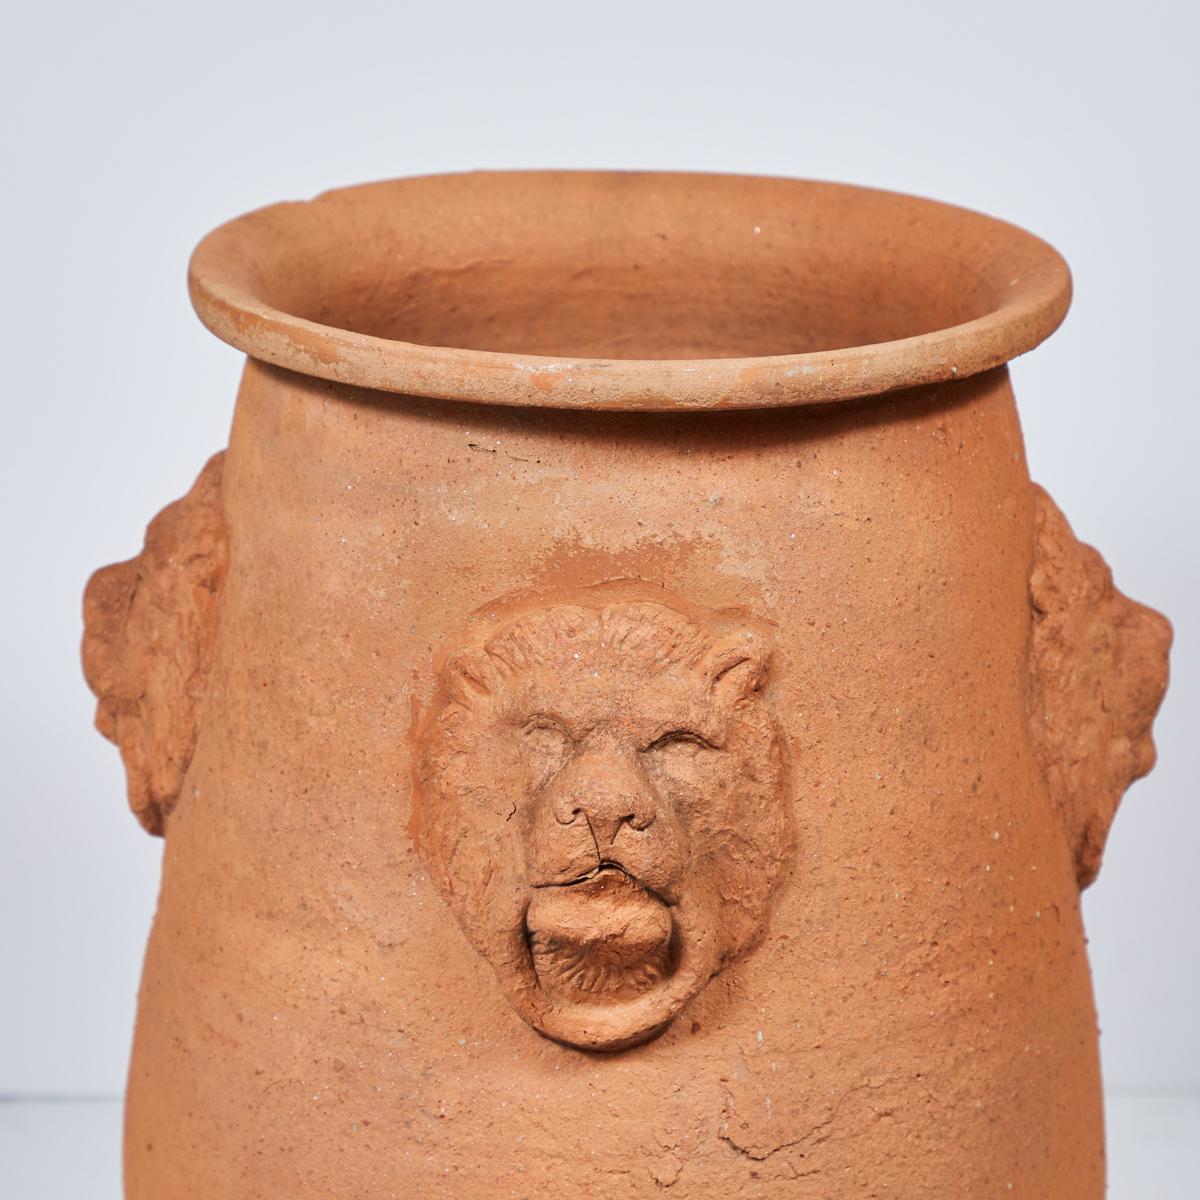 Large Italianate terra-cotta garden pot from early 20th-century England. With a slightly tapered oblong shape, rounded circular lip and four lion's head ring-pull carvings, the vessel has a rustic and classical feel.

England, circa